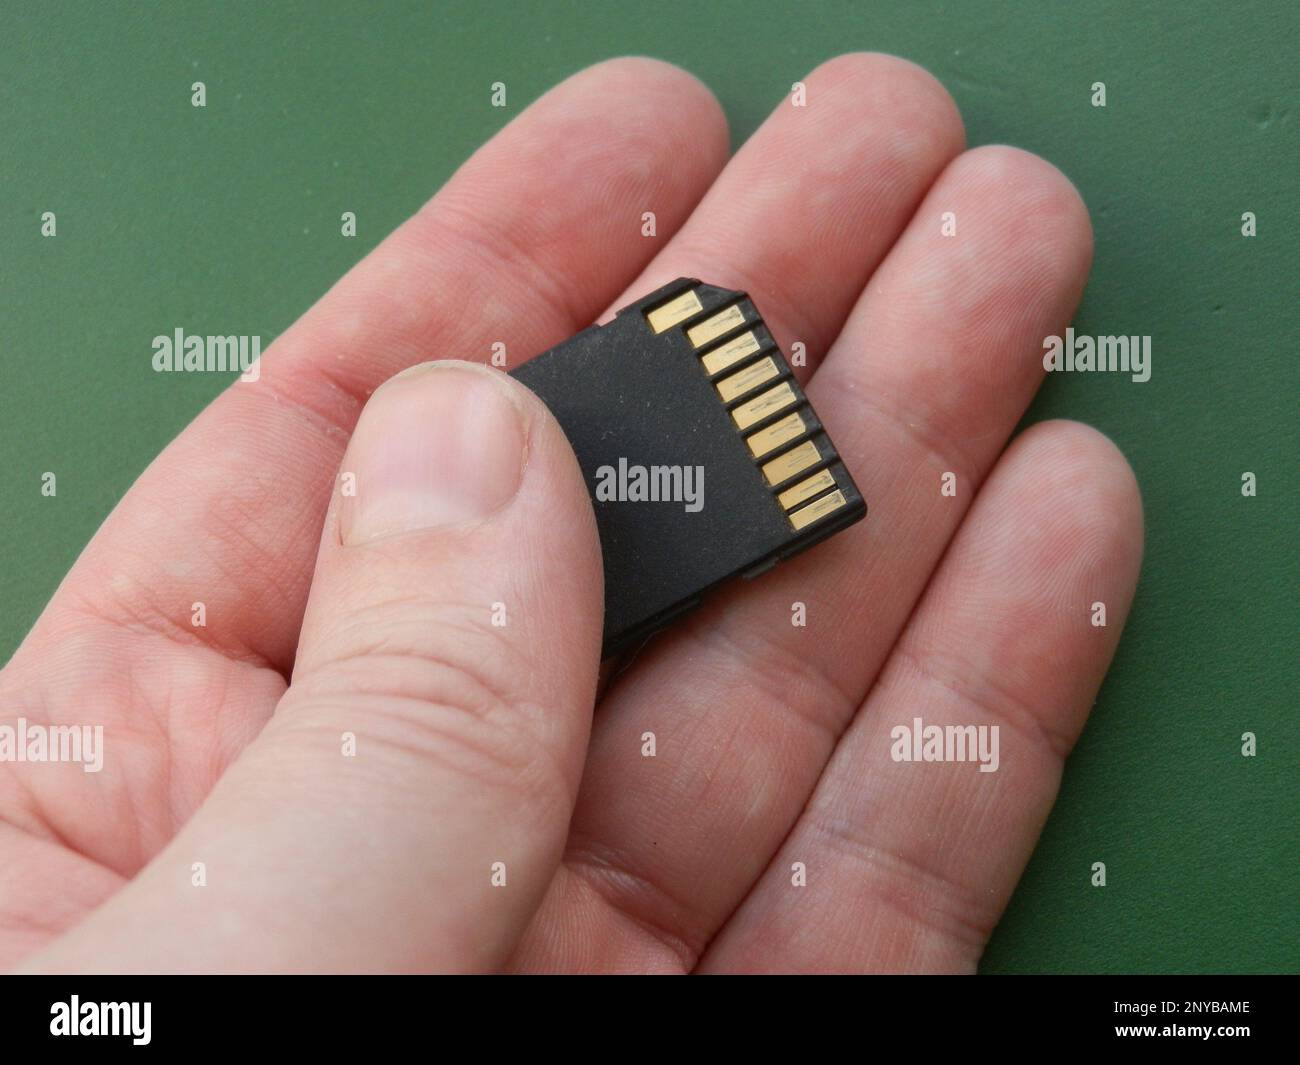 Accessory for smartphone and computer in the hand. Stock Photo